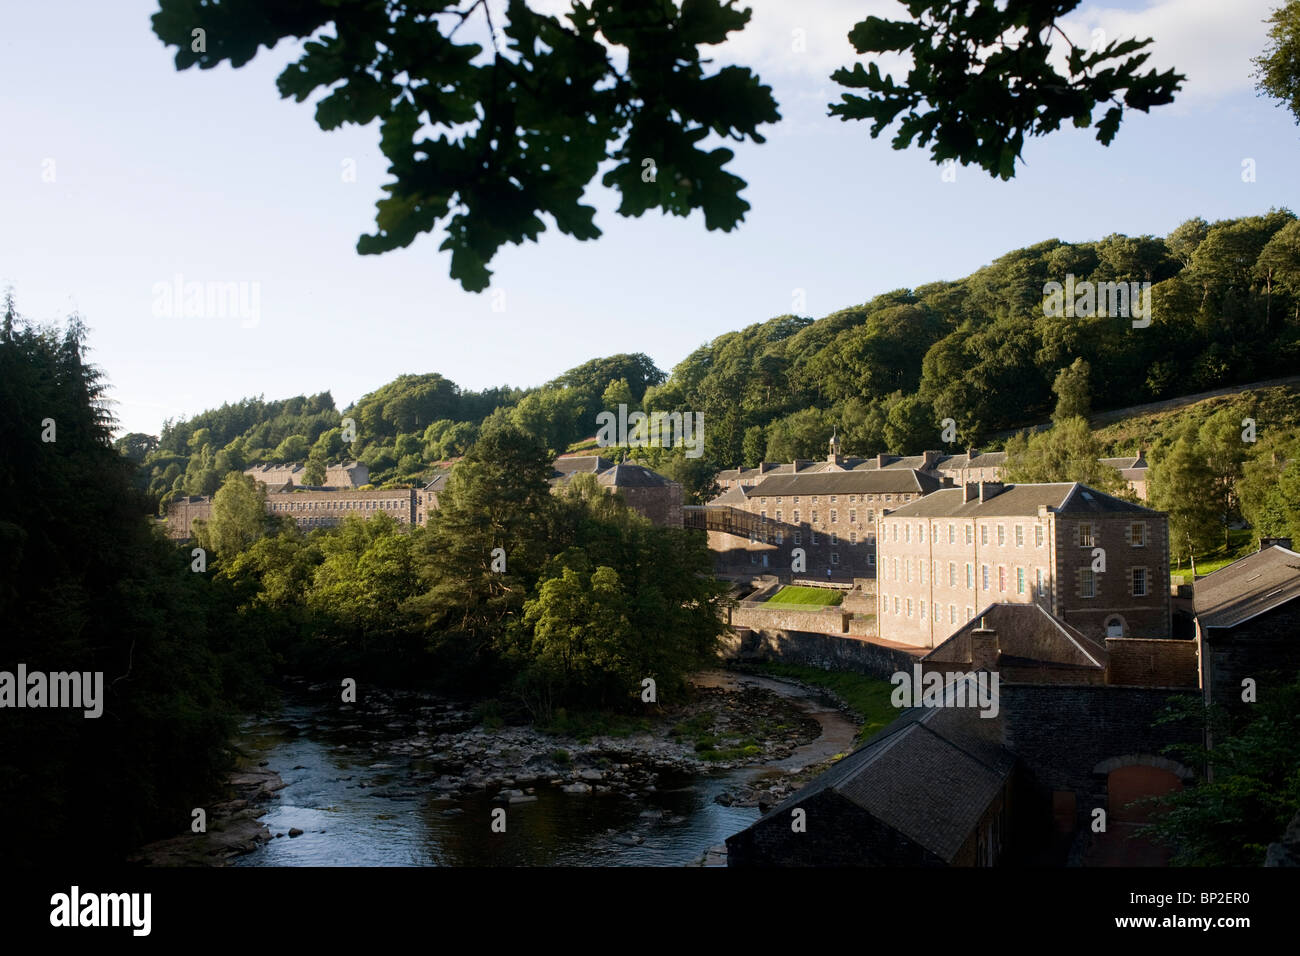 Overview of New Lanark, the Scottish industrial revolution community village managed by social pioneer Robert Owen. Stock Photo